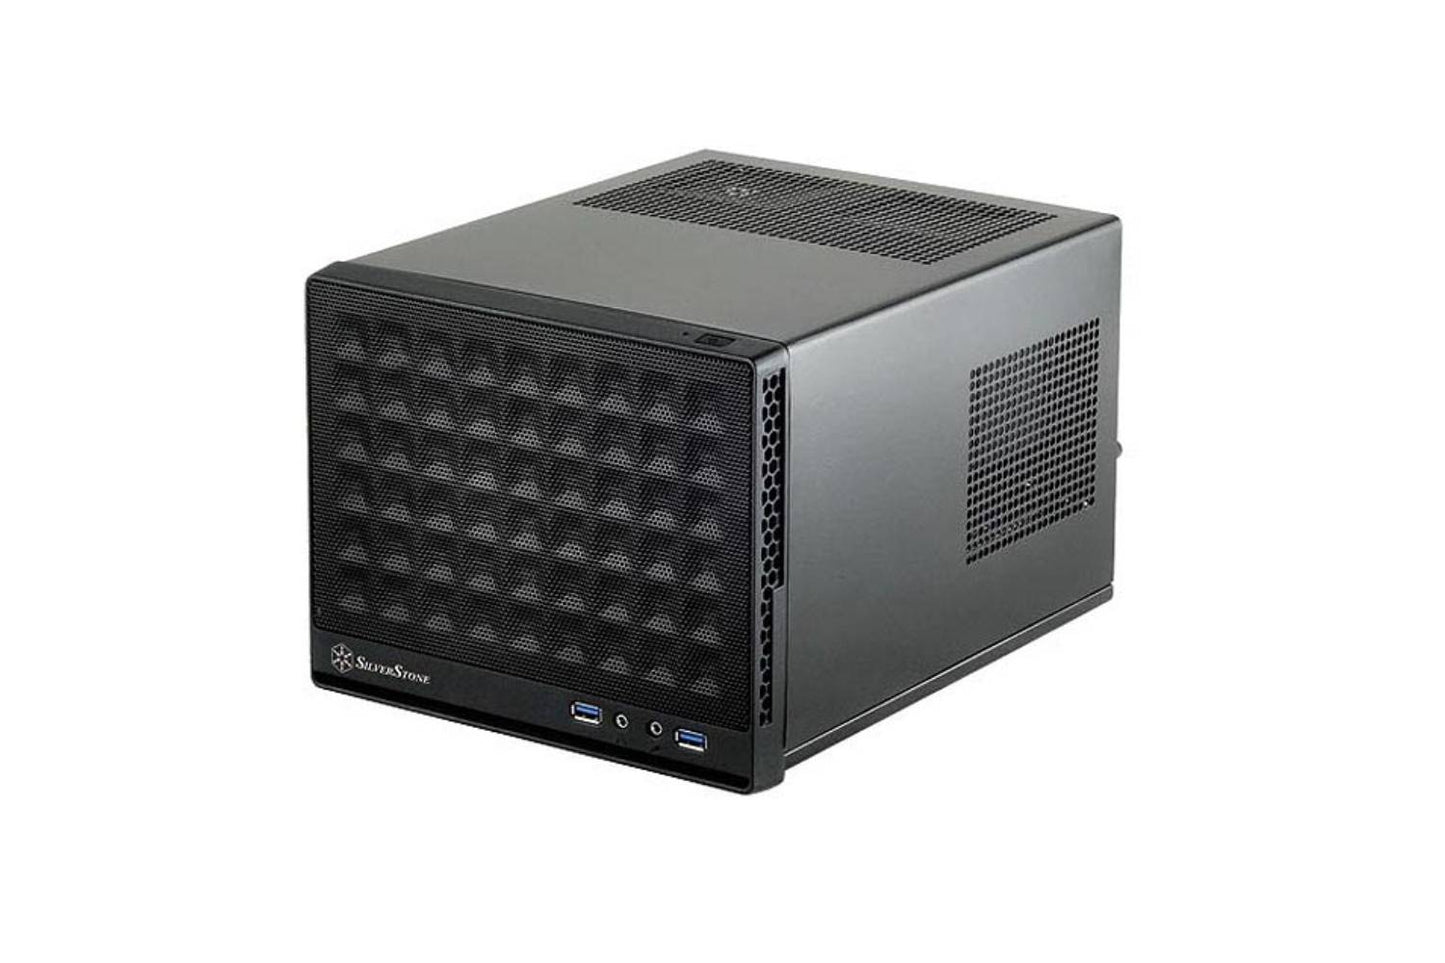 Silverstone Computer Case with Mesh Front Panel,Black (SG13B)